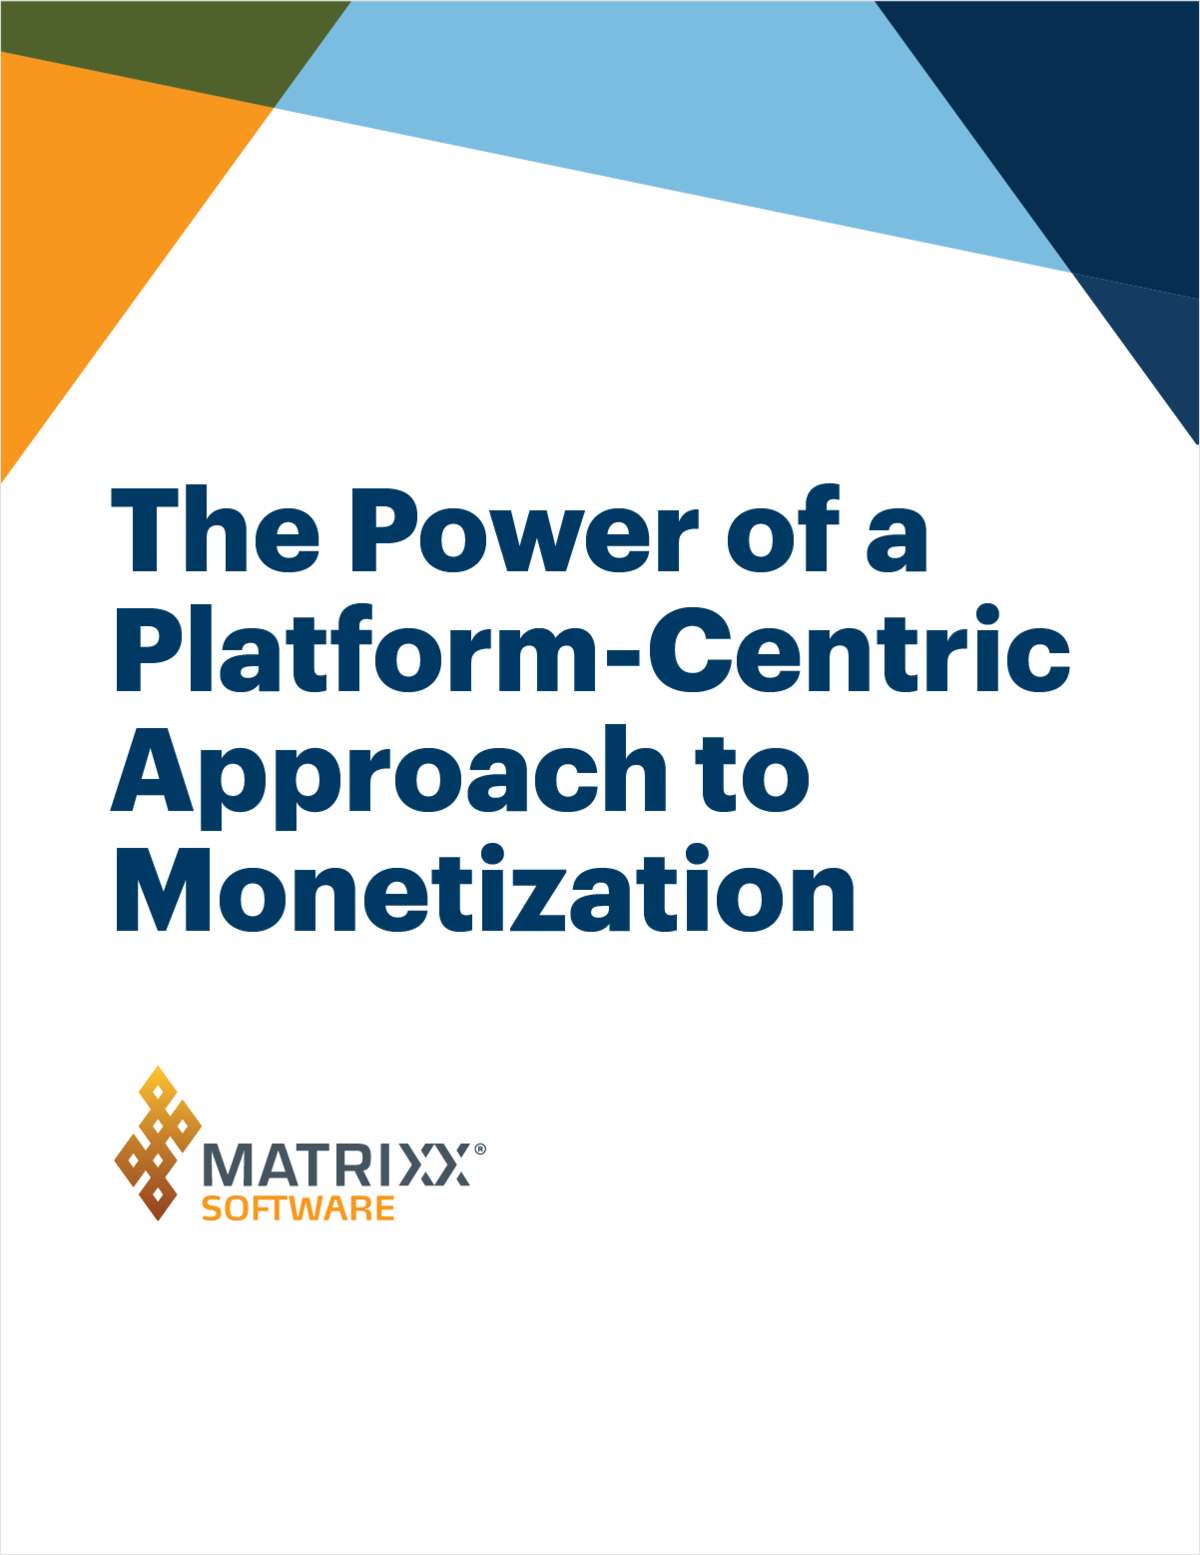 The Power of a Platform-Centric Approach to Monetization